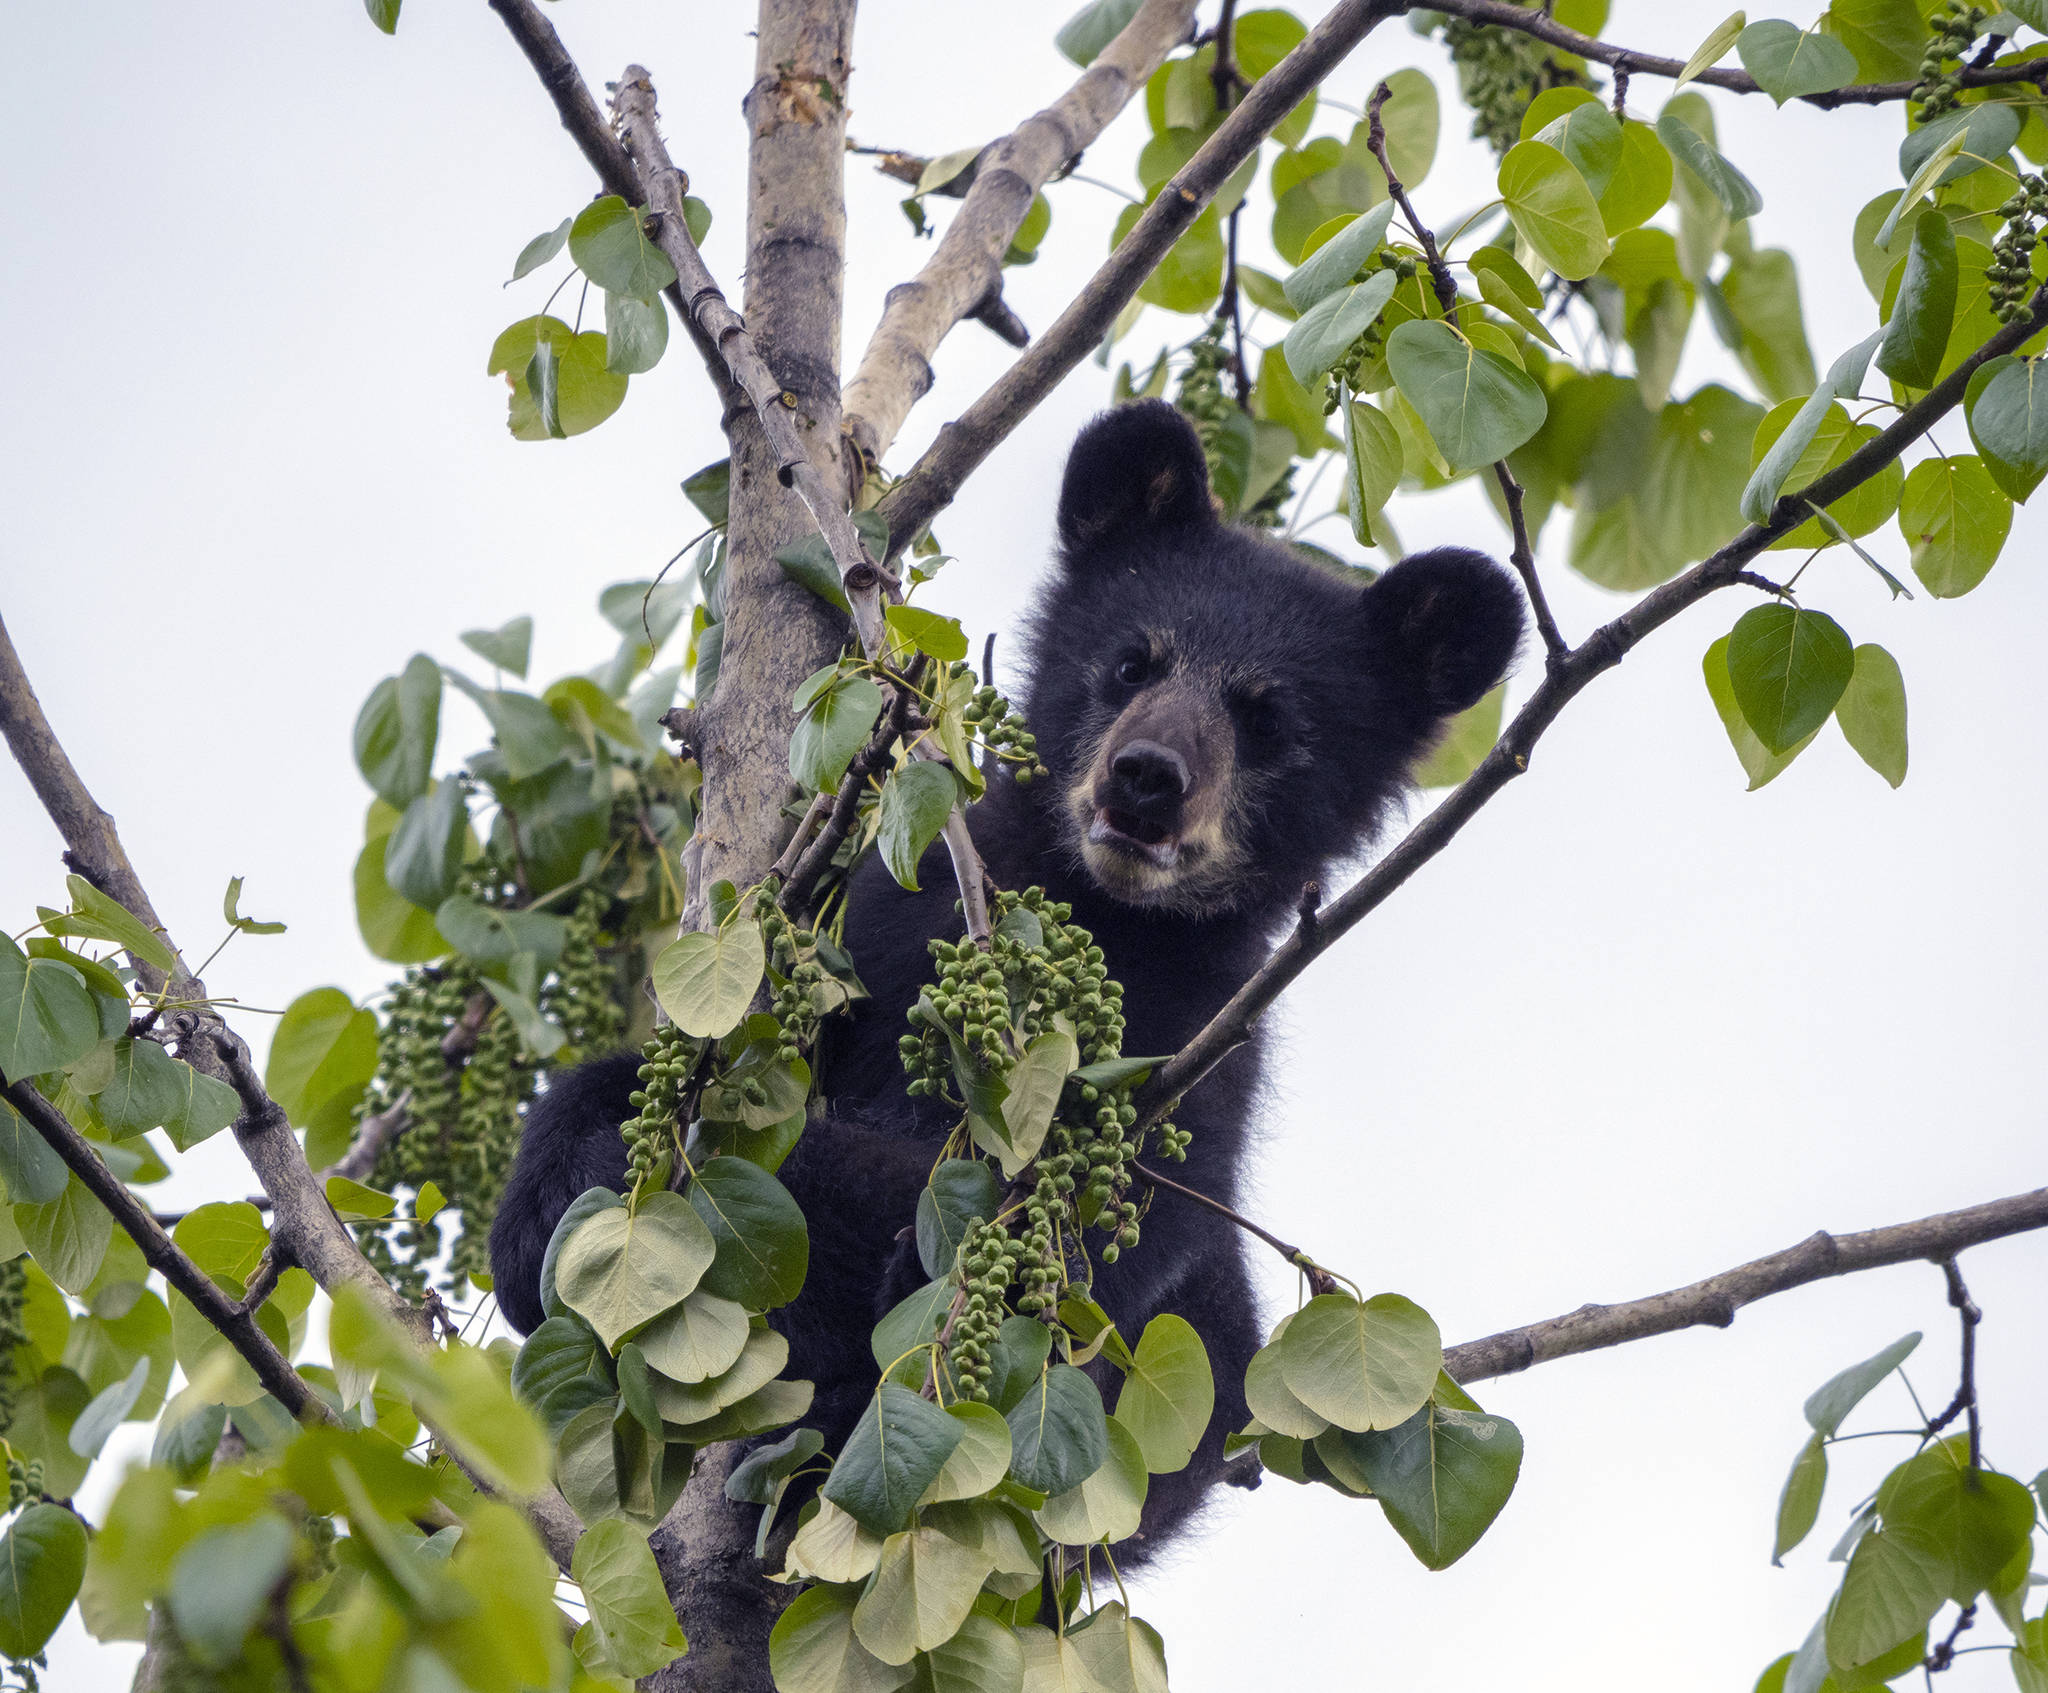 A black bear cub enjoys seed pods in a cottonwood tree at the Mendenhall Glacier on June 10, 2019. (Courtesy photo | Janice Gorle)